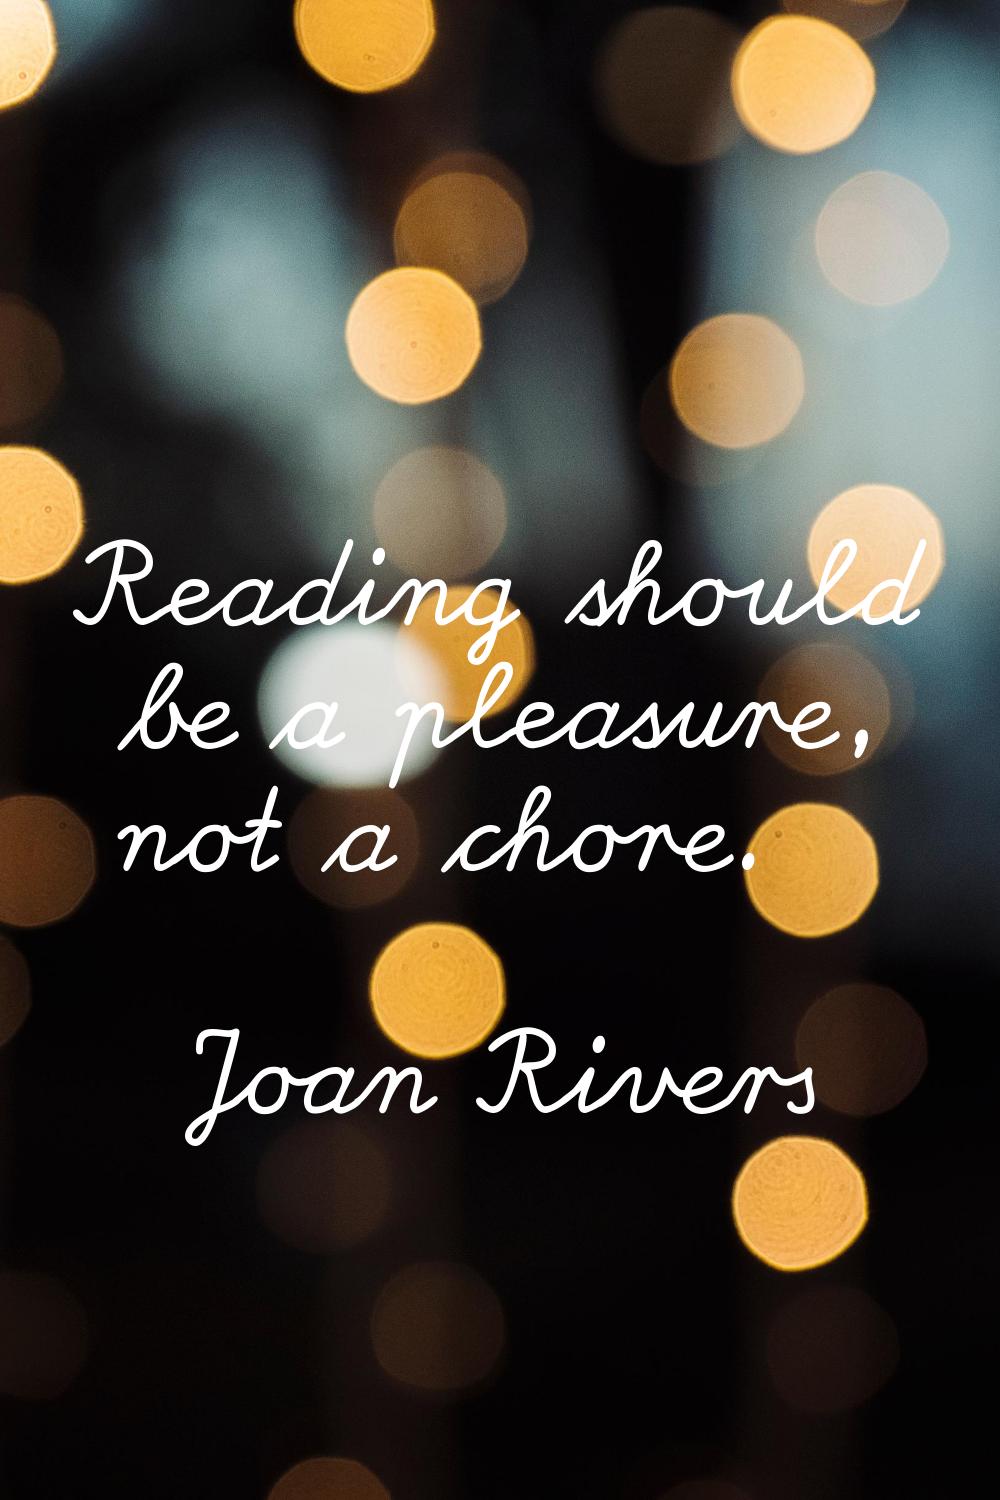 Reading should be a pleasure, not a chore.